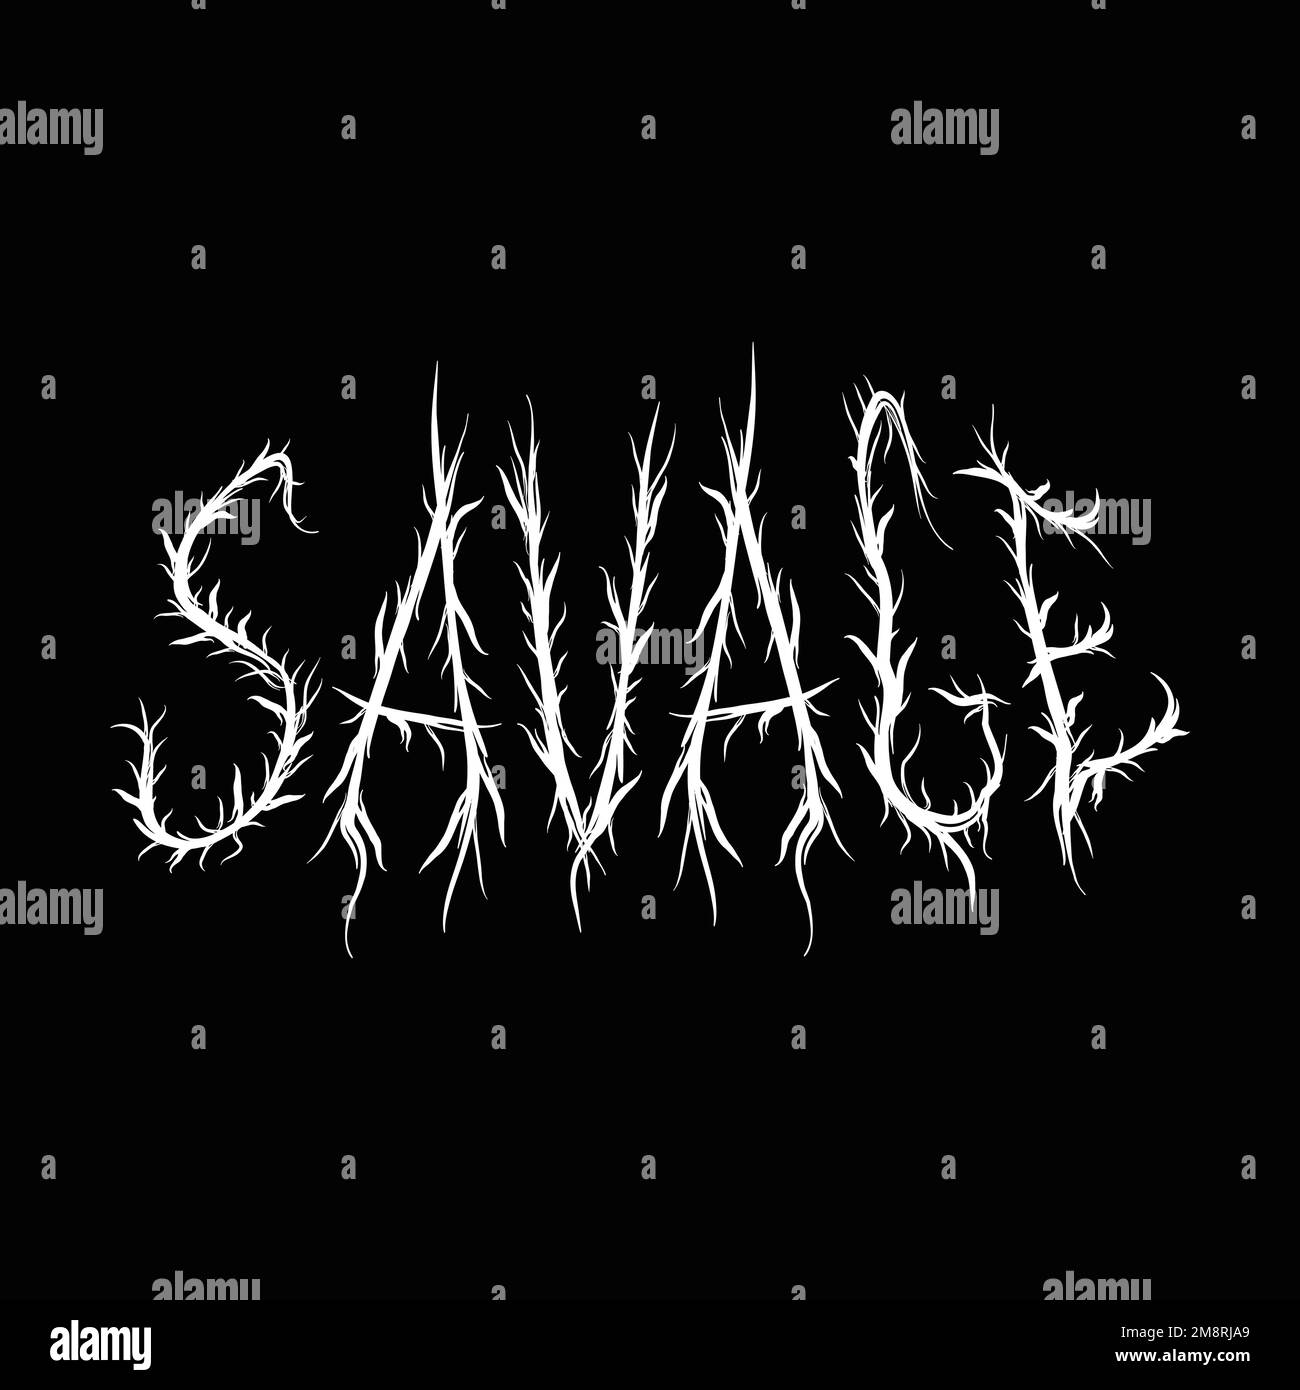 Savage quote,trendy black metal style letters.Vector hand drawn illustration.Savage abstract letters, acid fashion,black metal style print for t-shirt,poster concept Stock Vector